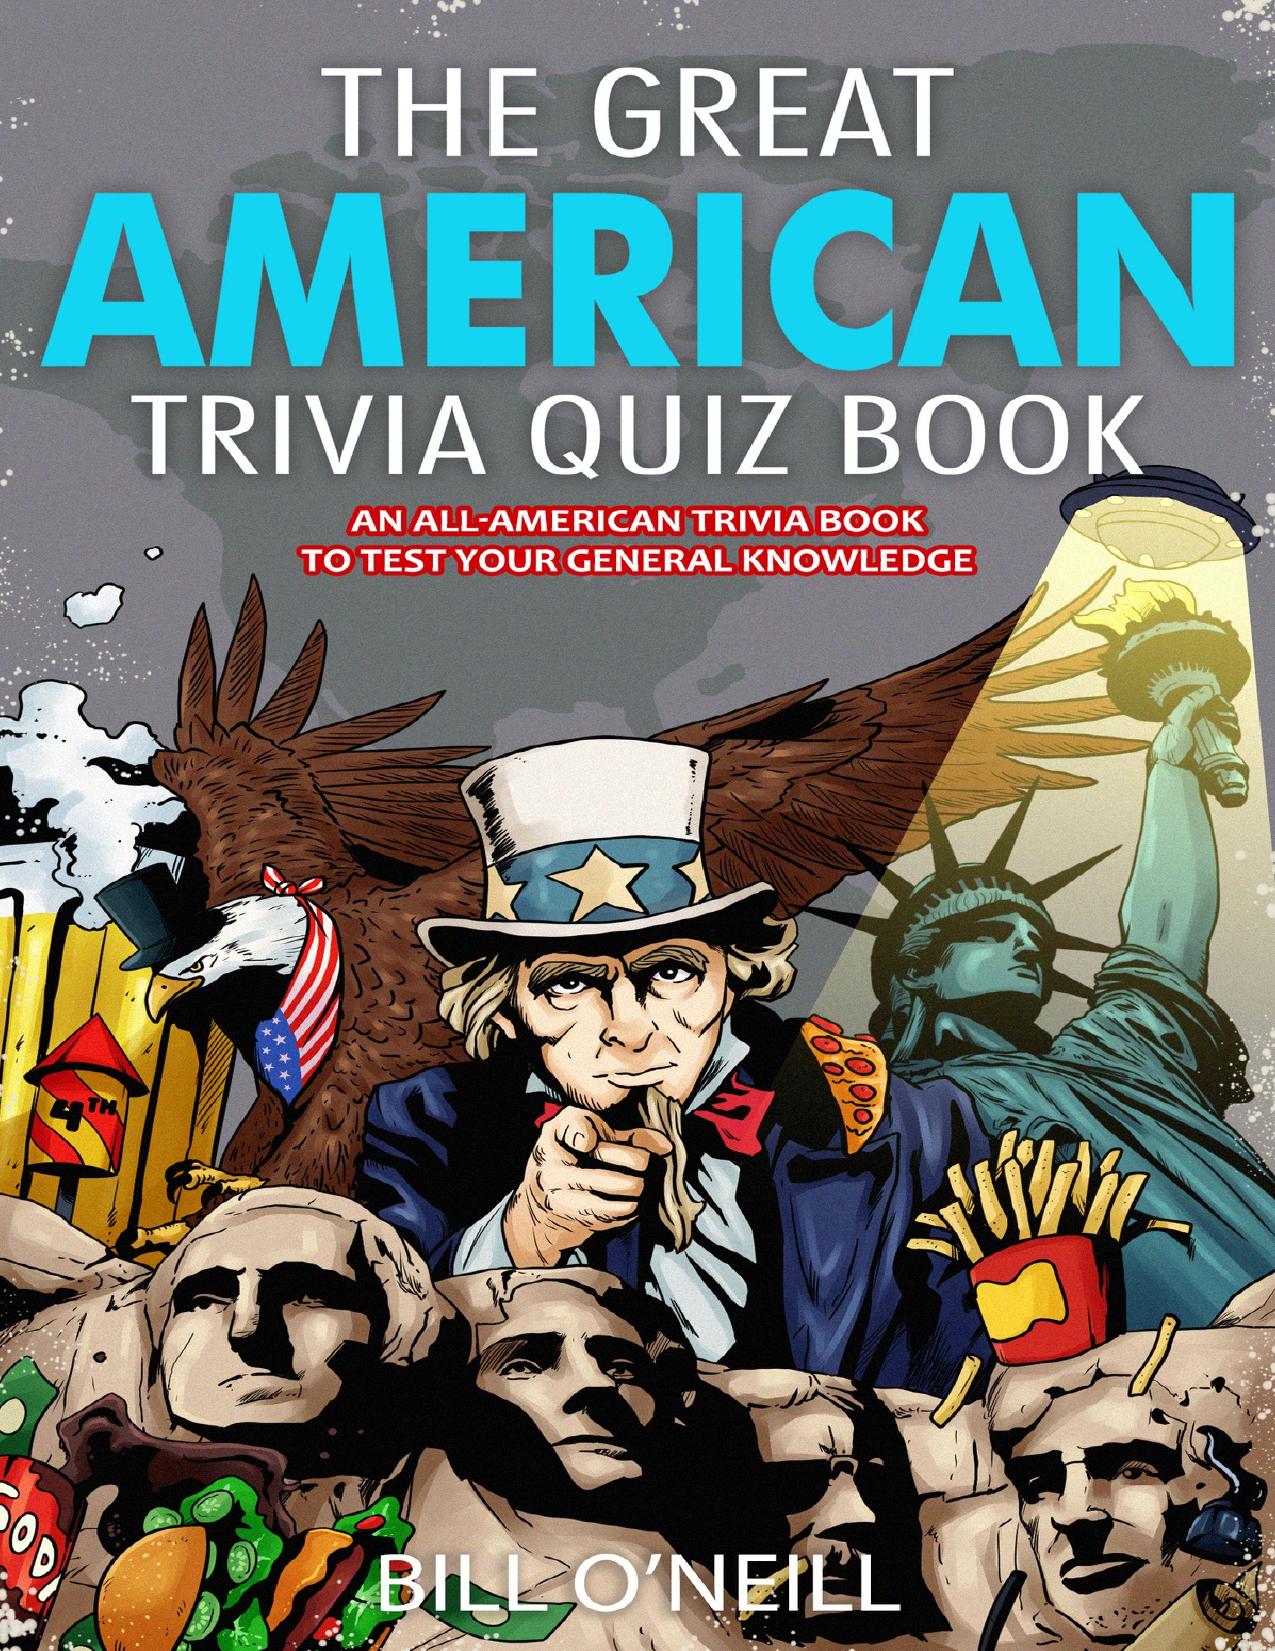 The Great American Trivia Quiz Book: An All-American Trivia Book to Test Your General Knowledge! by Bill O'Neill